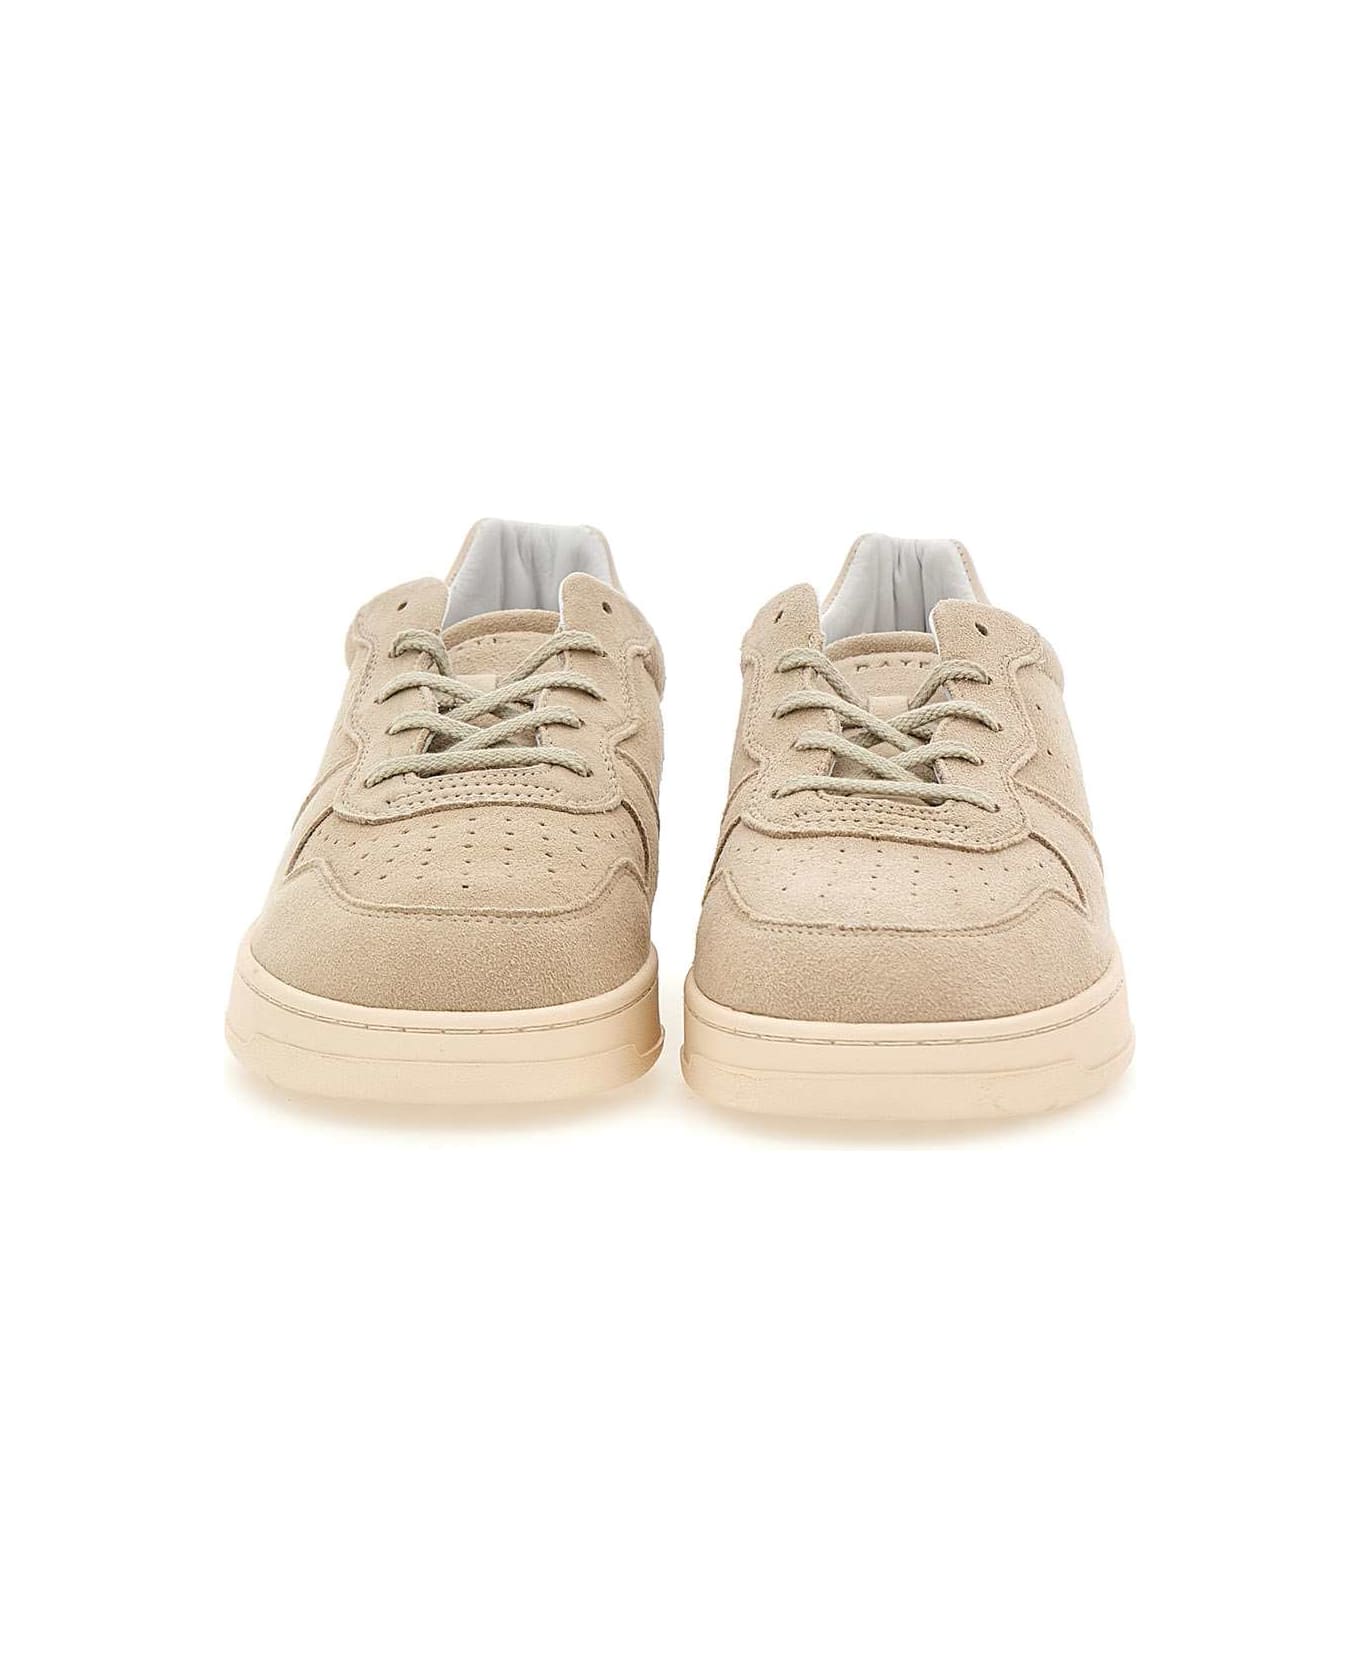 D.A.T.E. "court 2.0 Colored" Suede Sneakers - BEIGE スニーカー